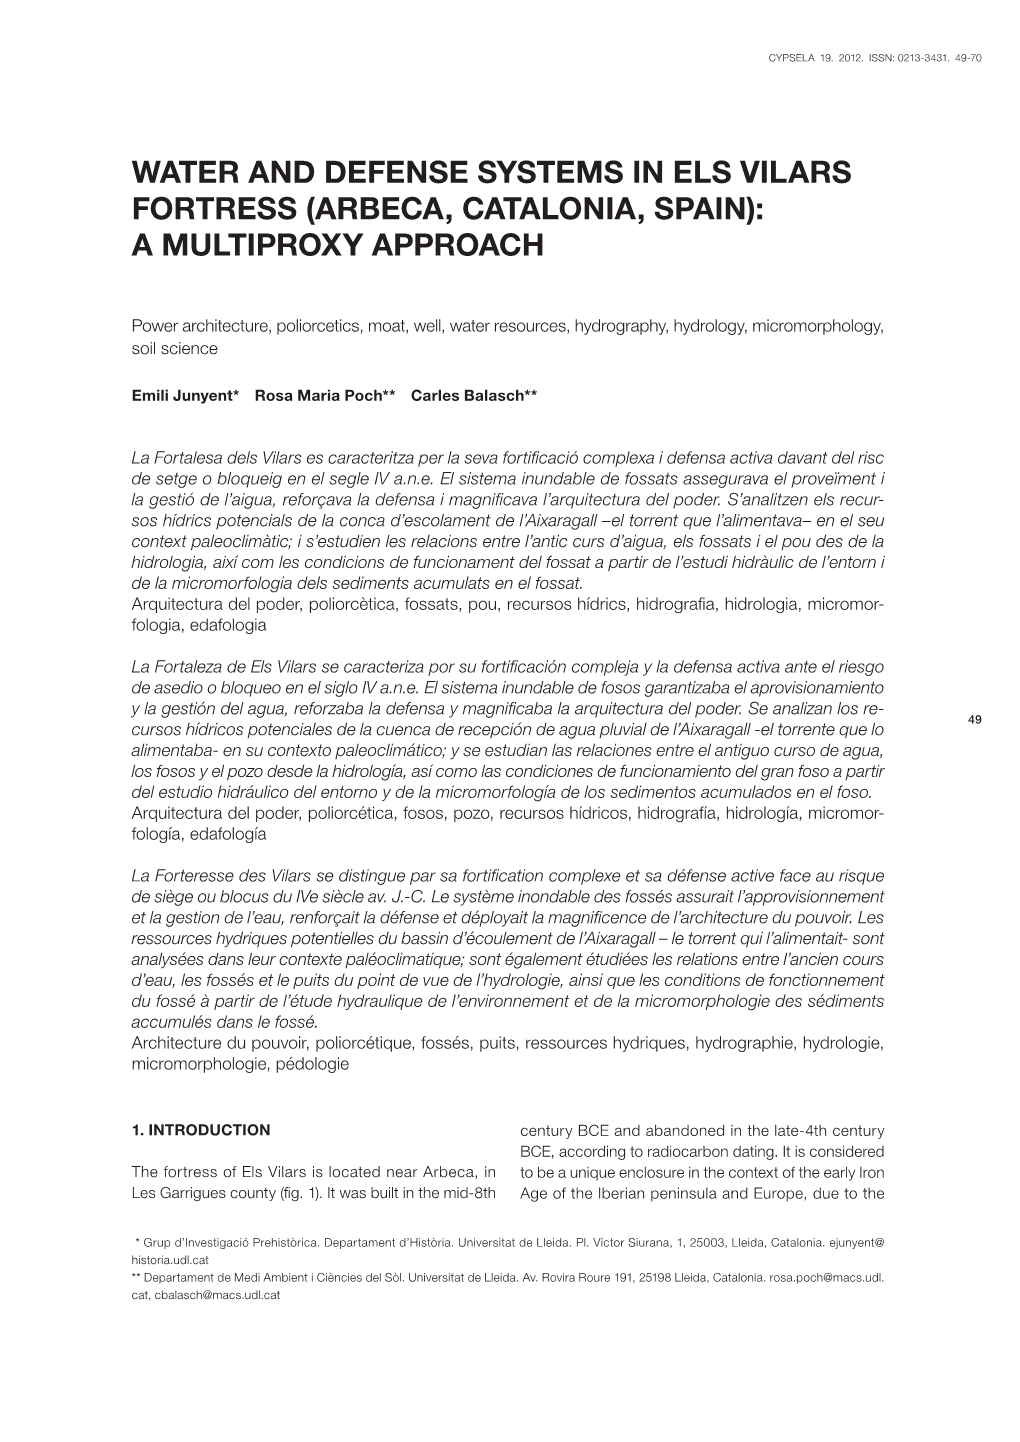 Water and Defense Systems in Els Vilars Fortress (Arbeca, Catalonia, Spain): a Multiproxy Approach